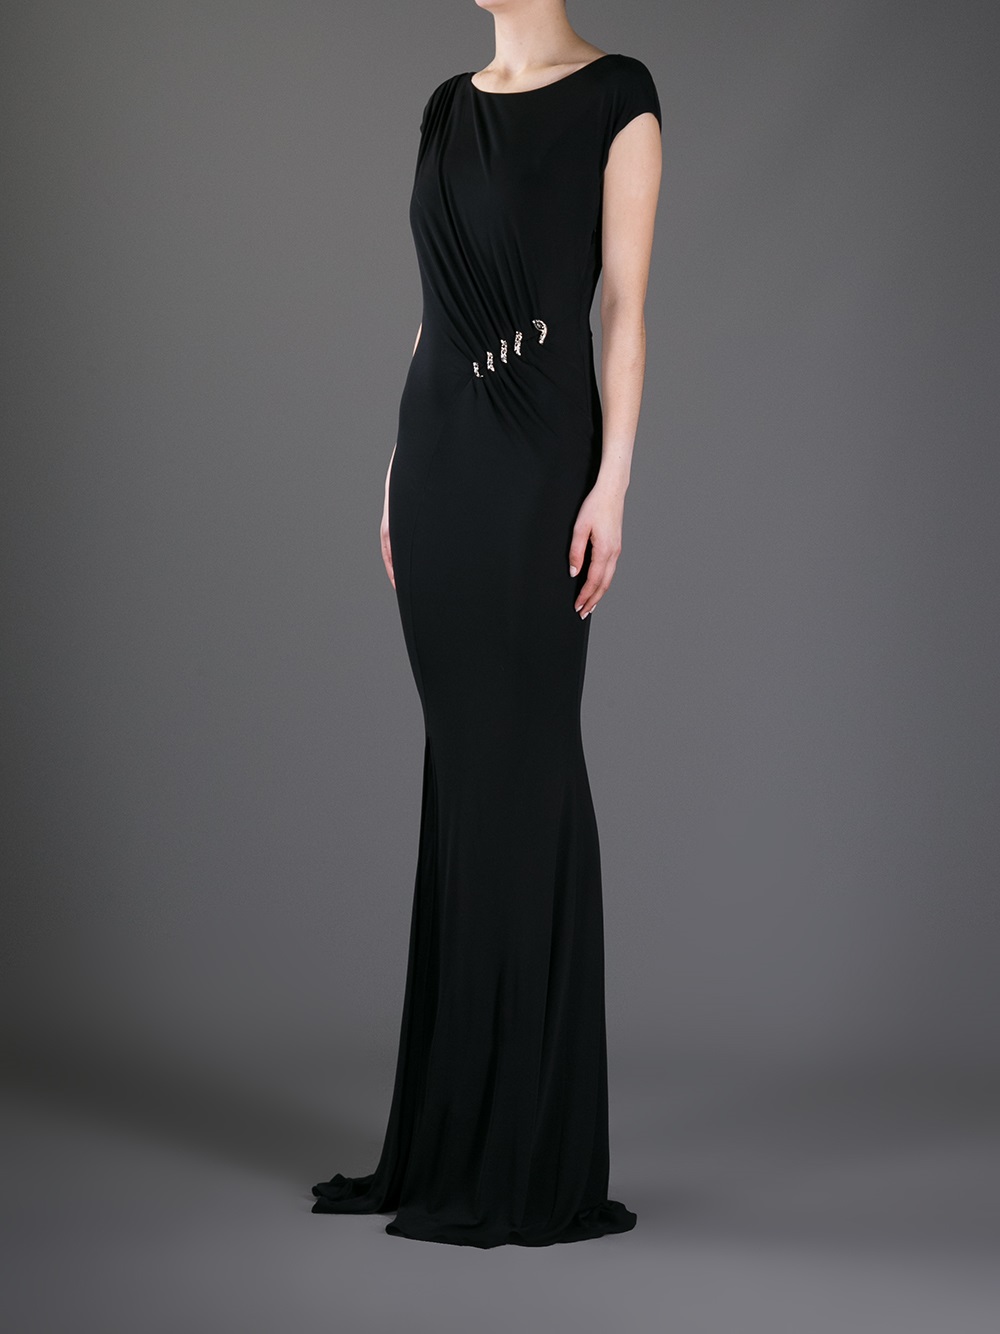 Lyst - Roberto cavalli Snake Embellished Gown in Black